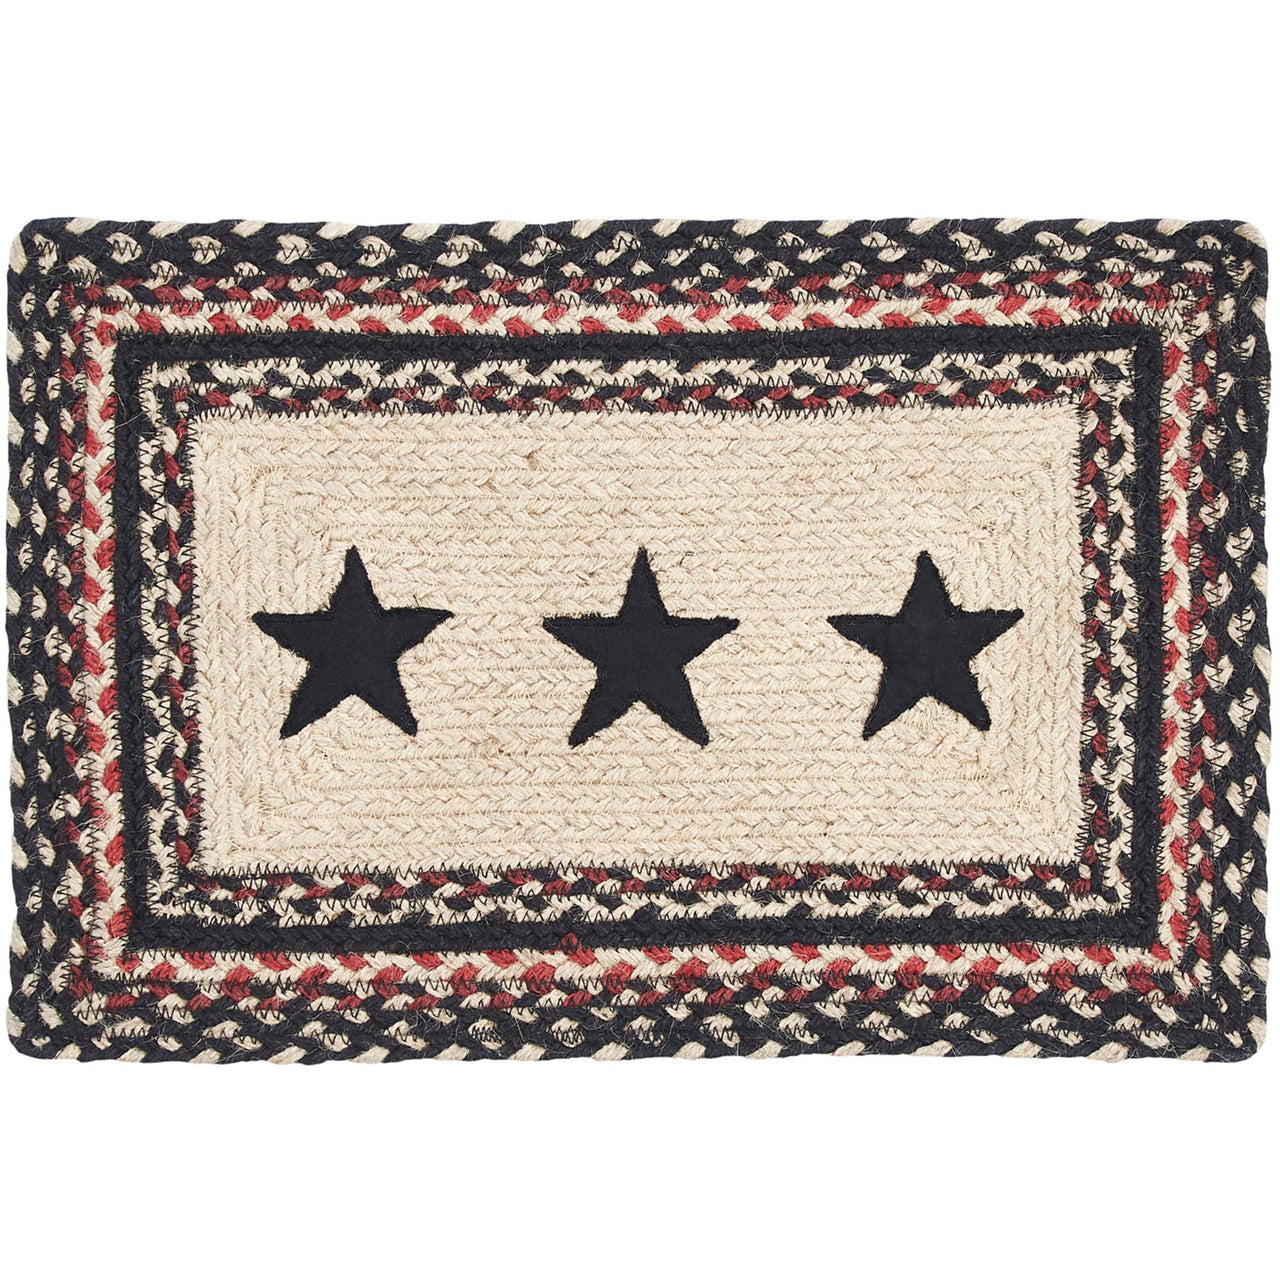 Colonial Star Jute Braided Rect Placemat 10"x15" VHC Brands